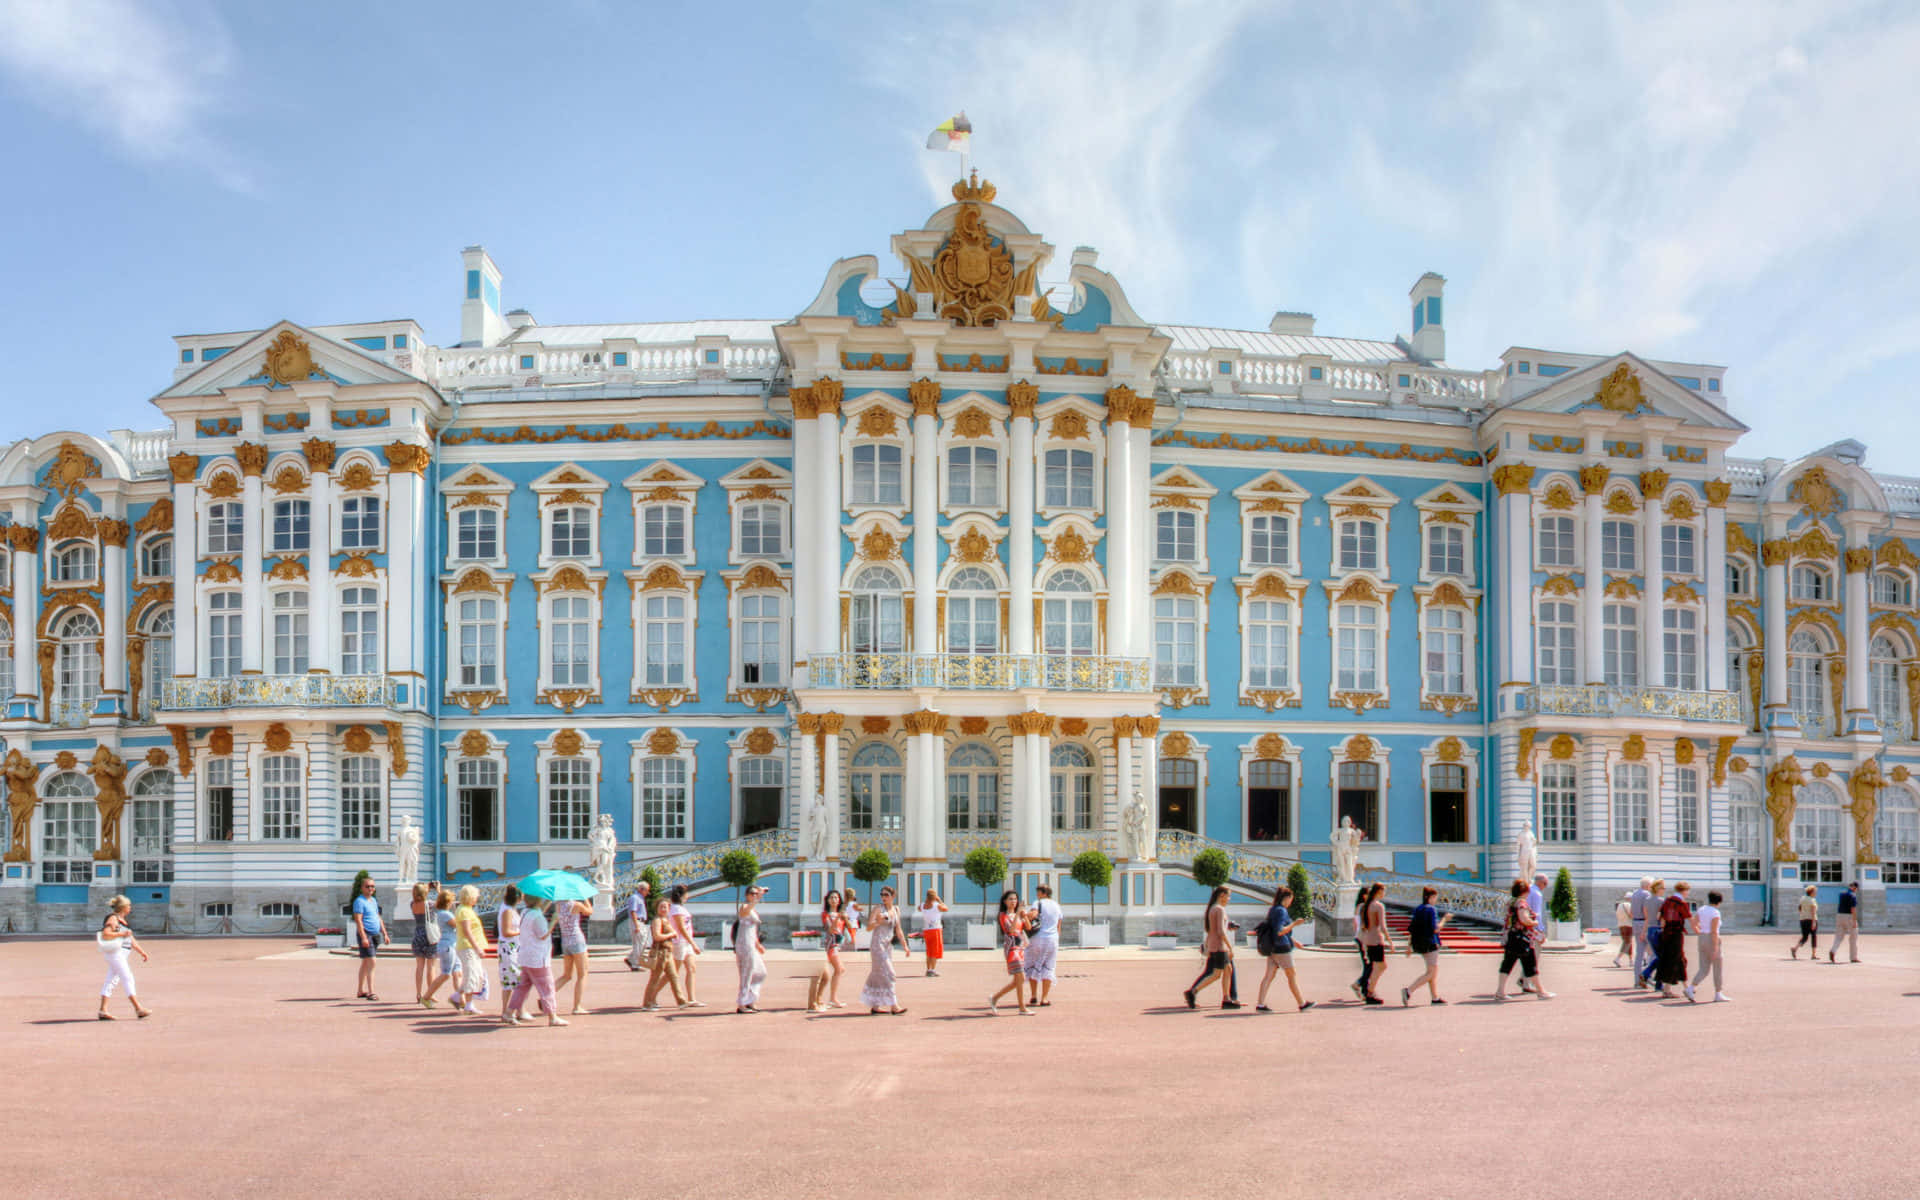 Tourists exploring the magnificent Catherine Palace in Russia Wallpaper